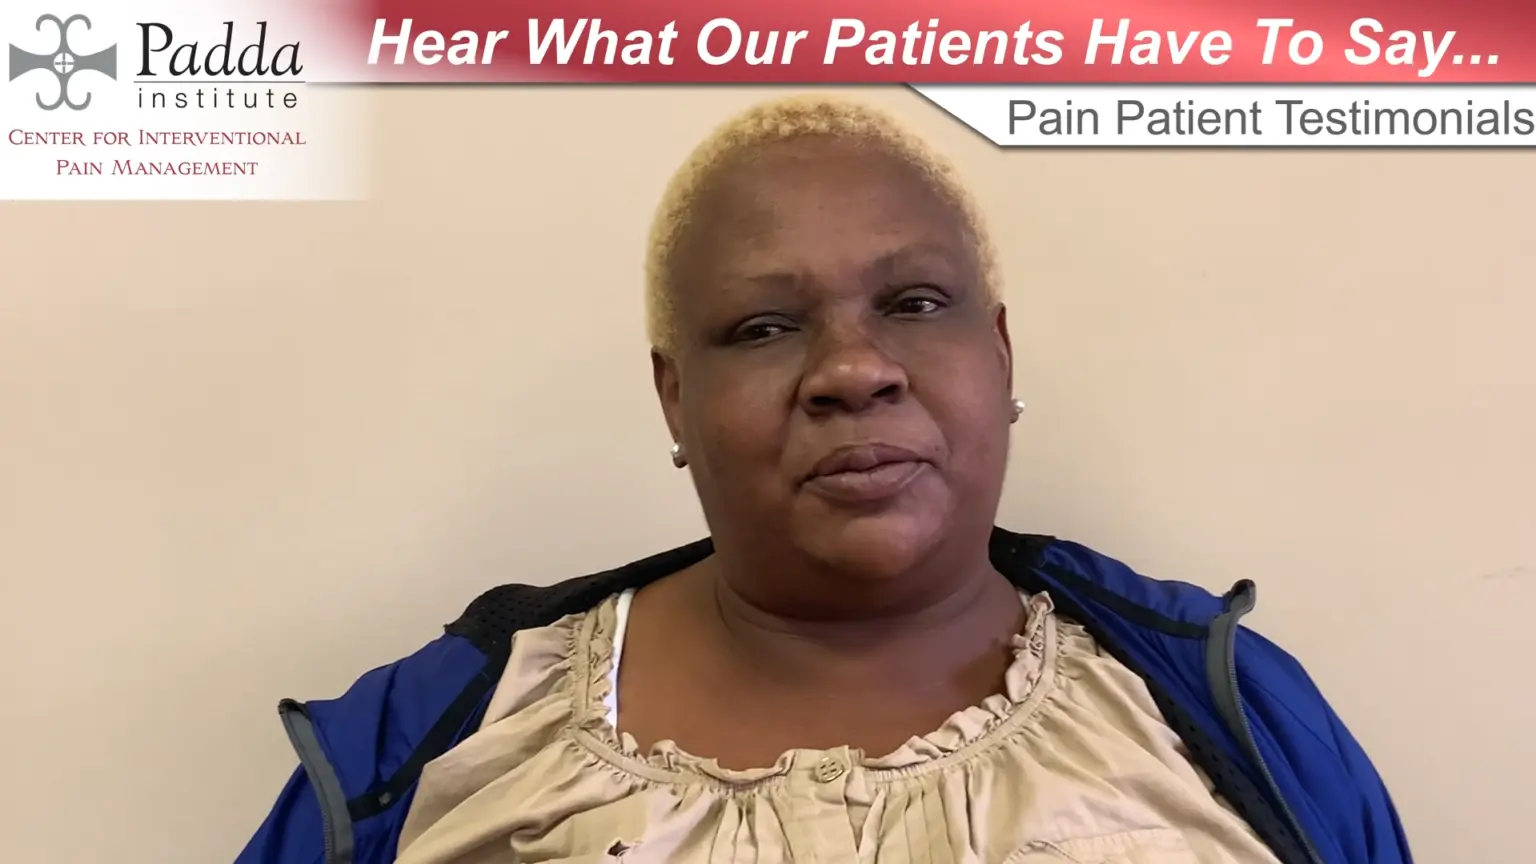 Our Patient's Journey to Pain Relief - Padda Institute